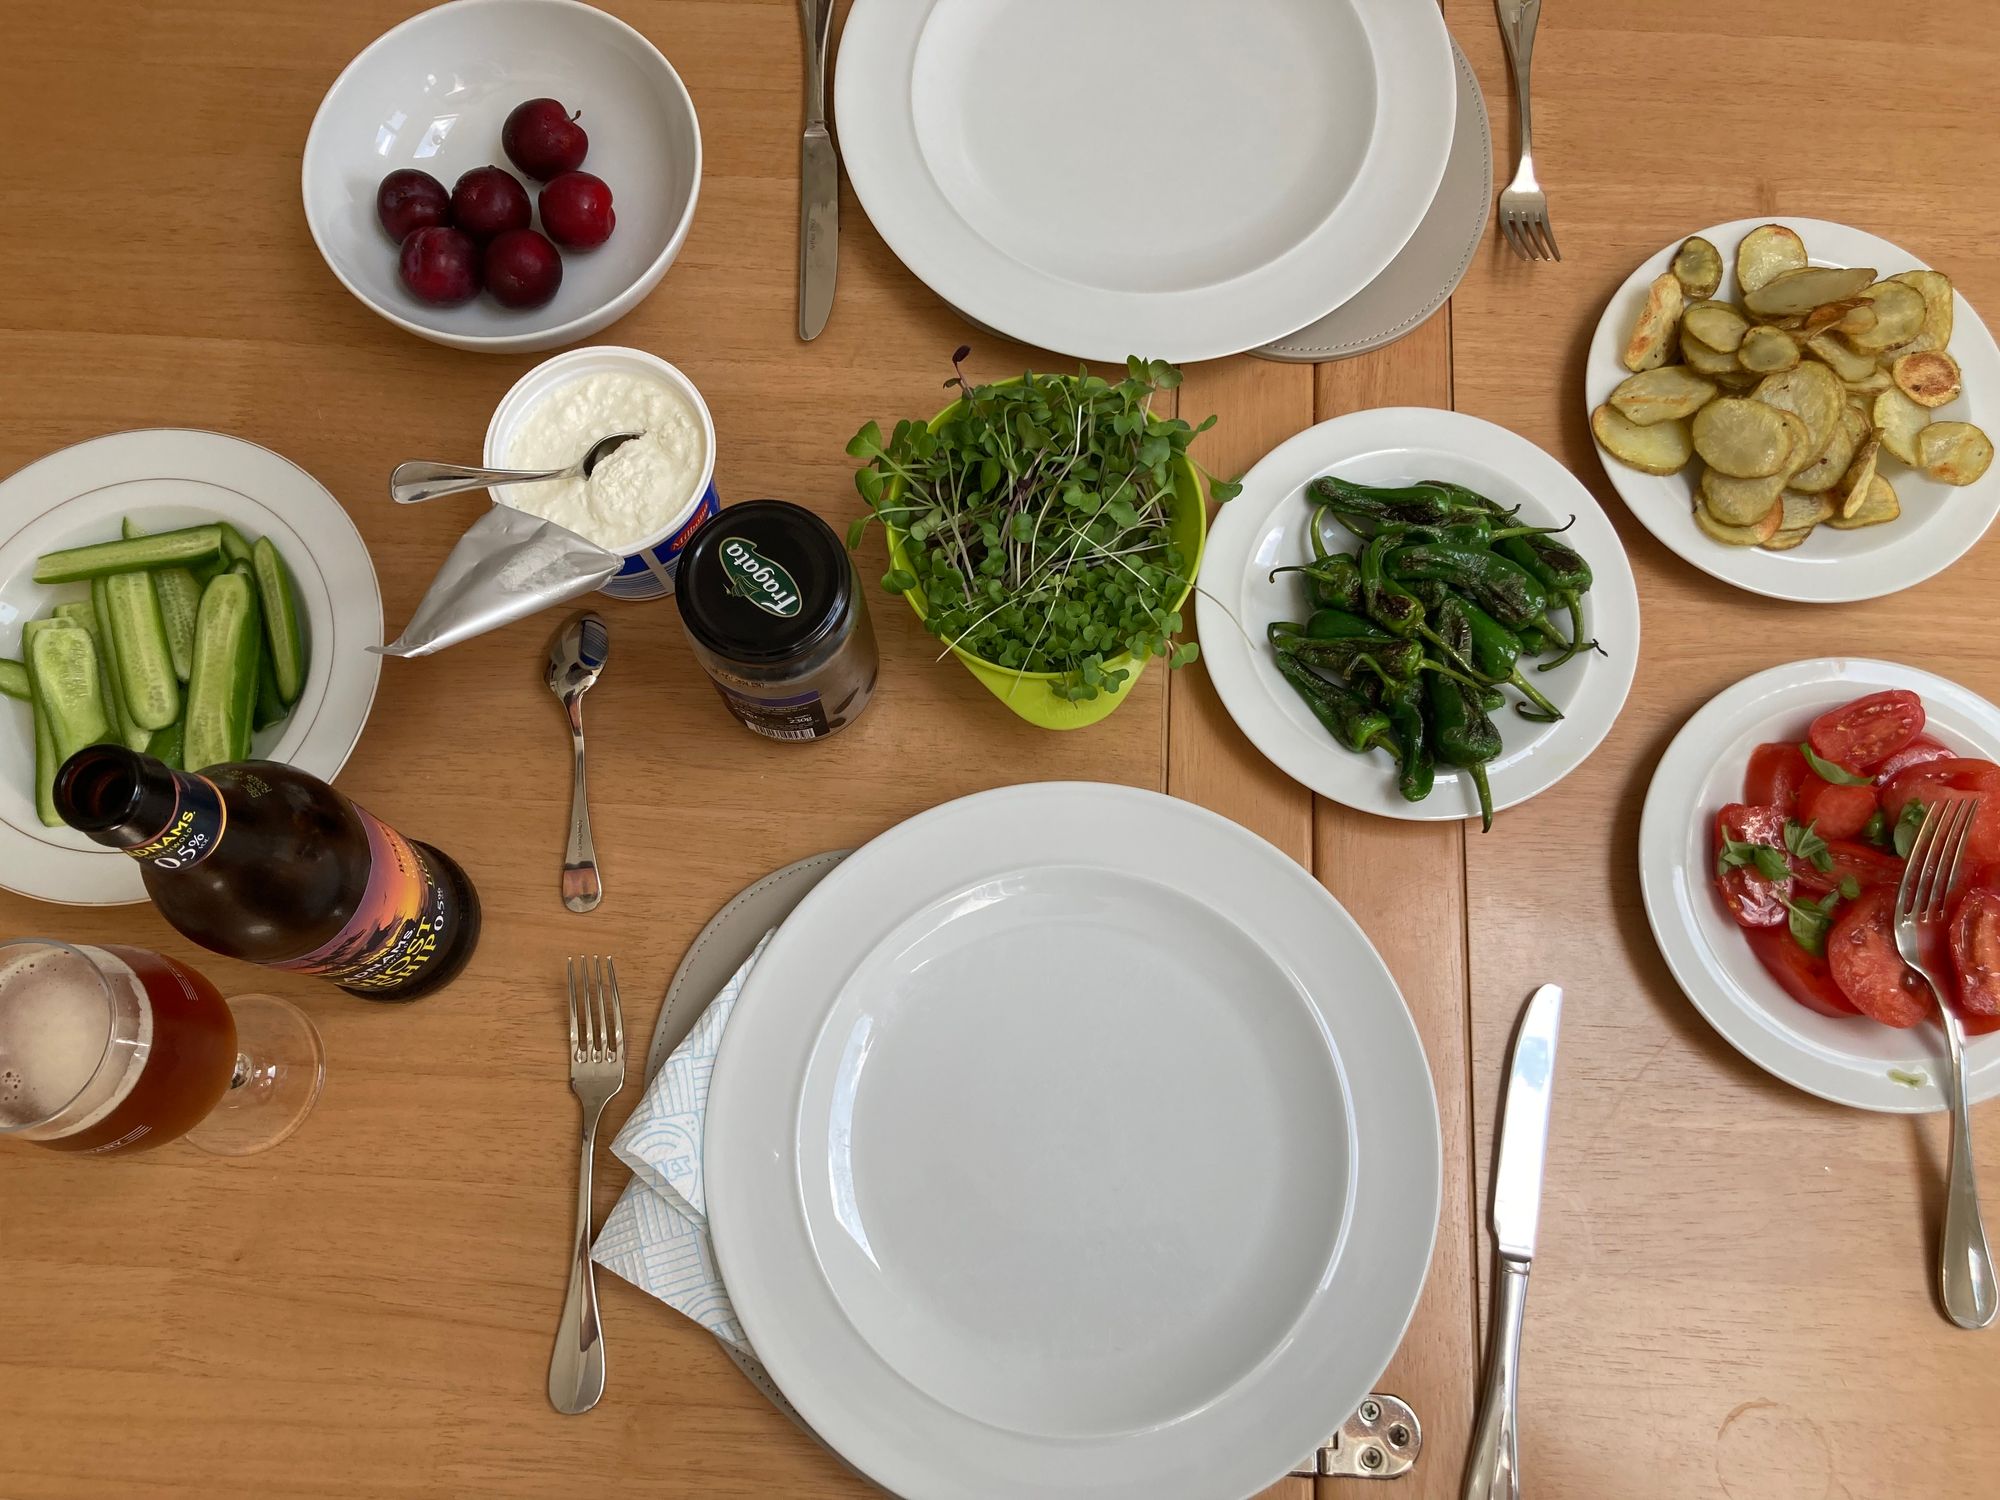 A table laid out for a meal of various salads